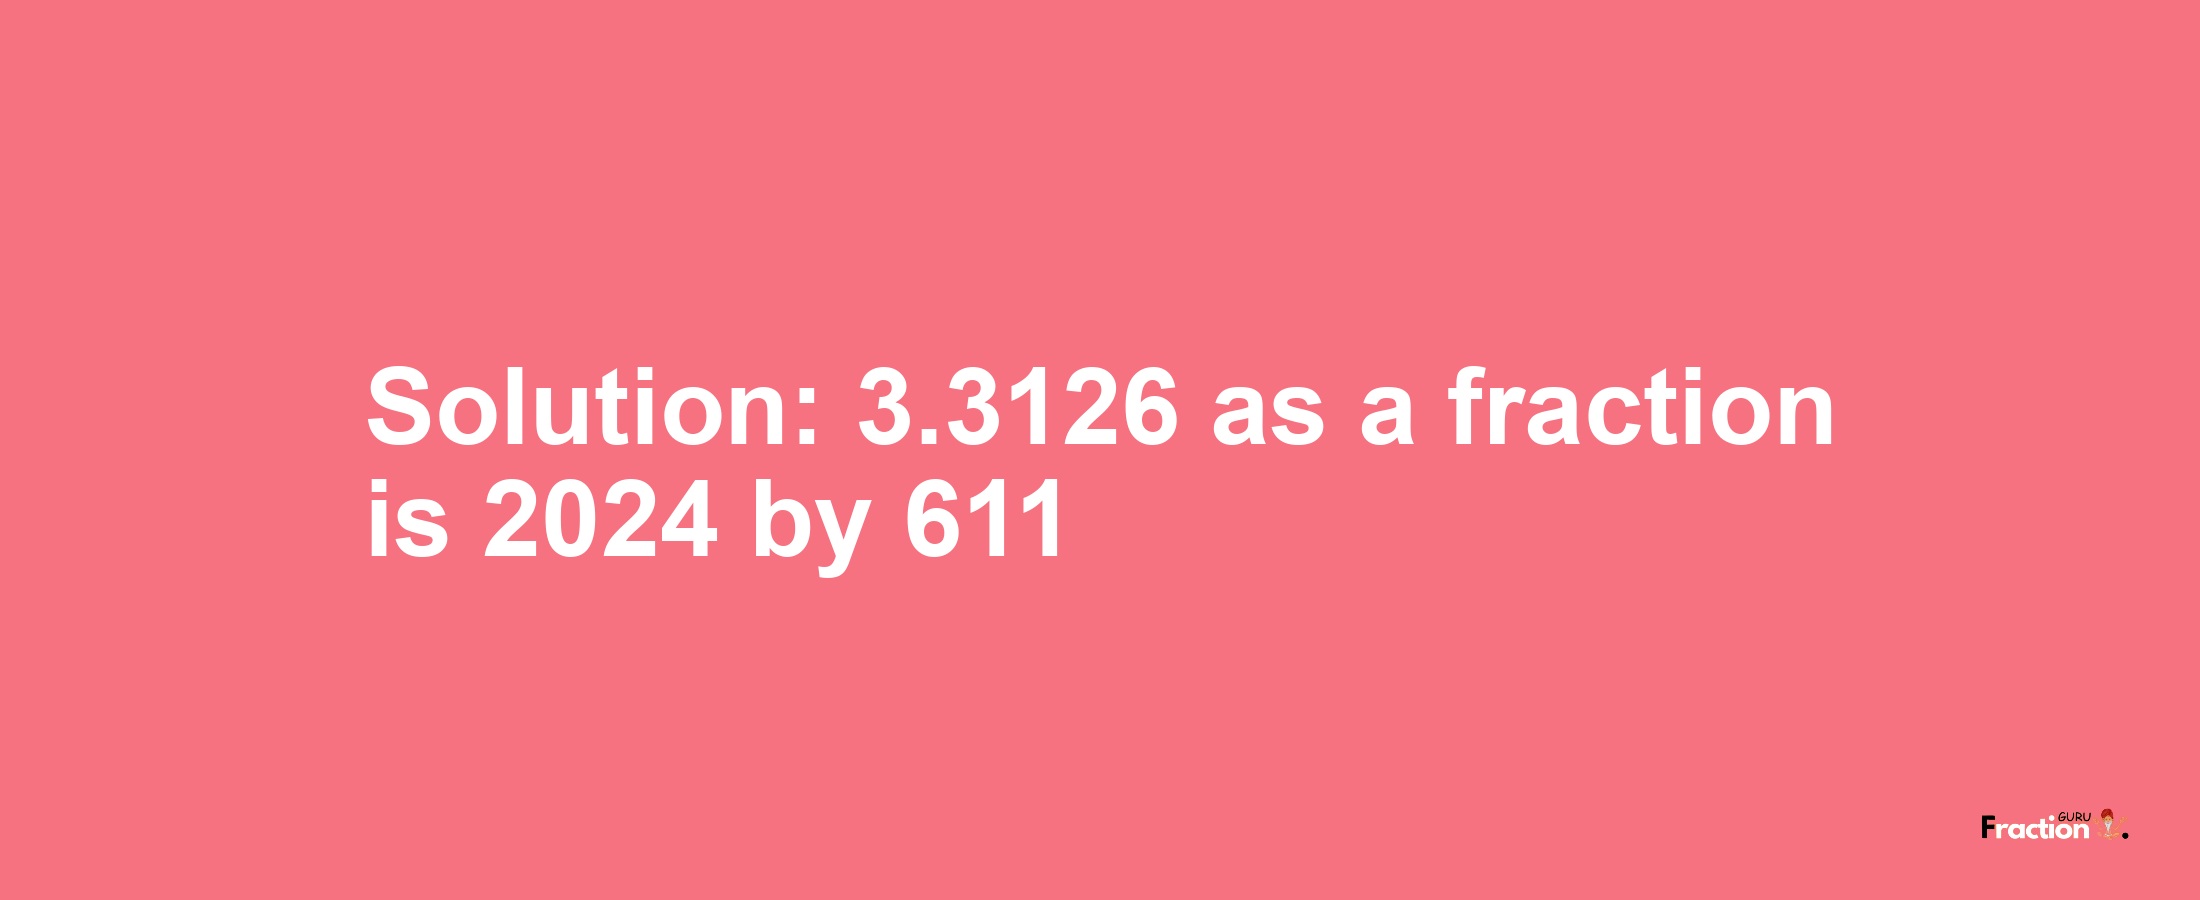 Solution:3.3126 as a fraction is 2024/611